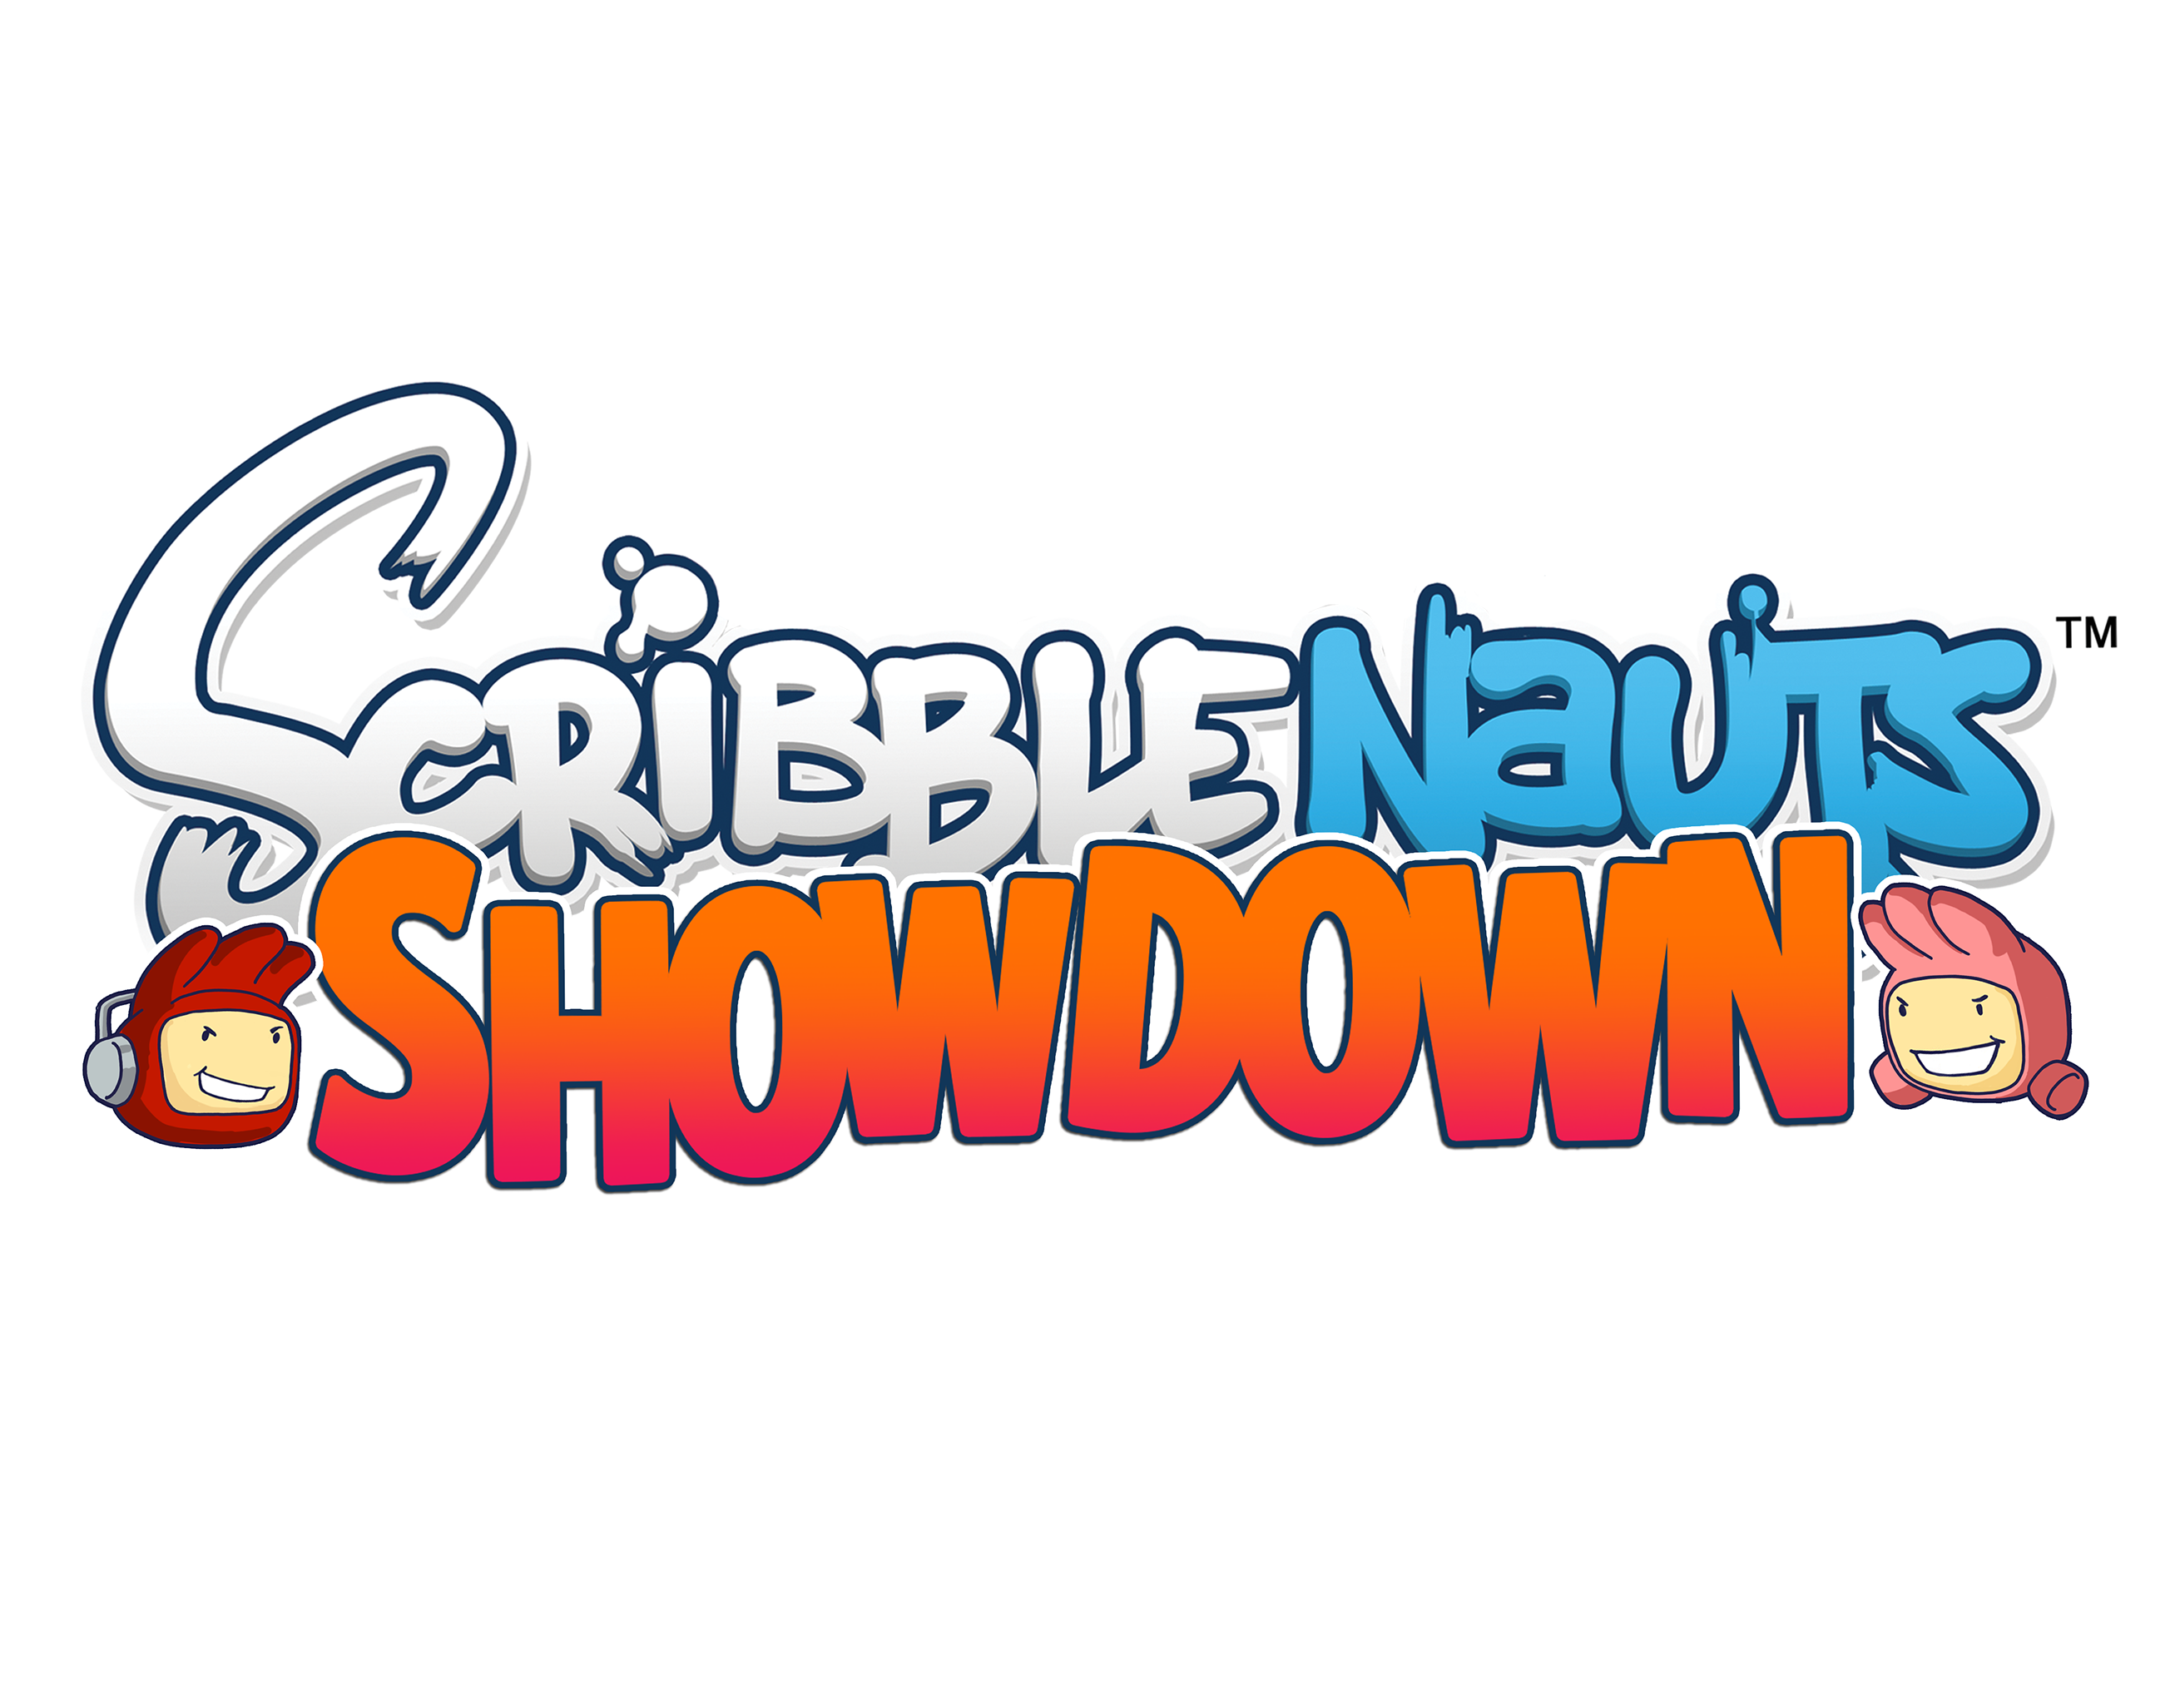 Youtube clipart xbox one. Scribblenauts showdown announced for